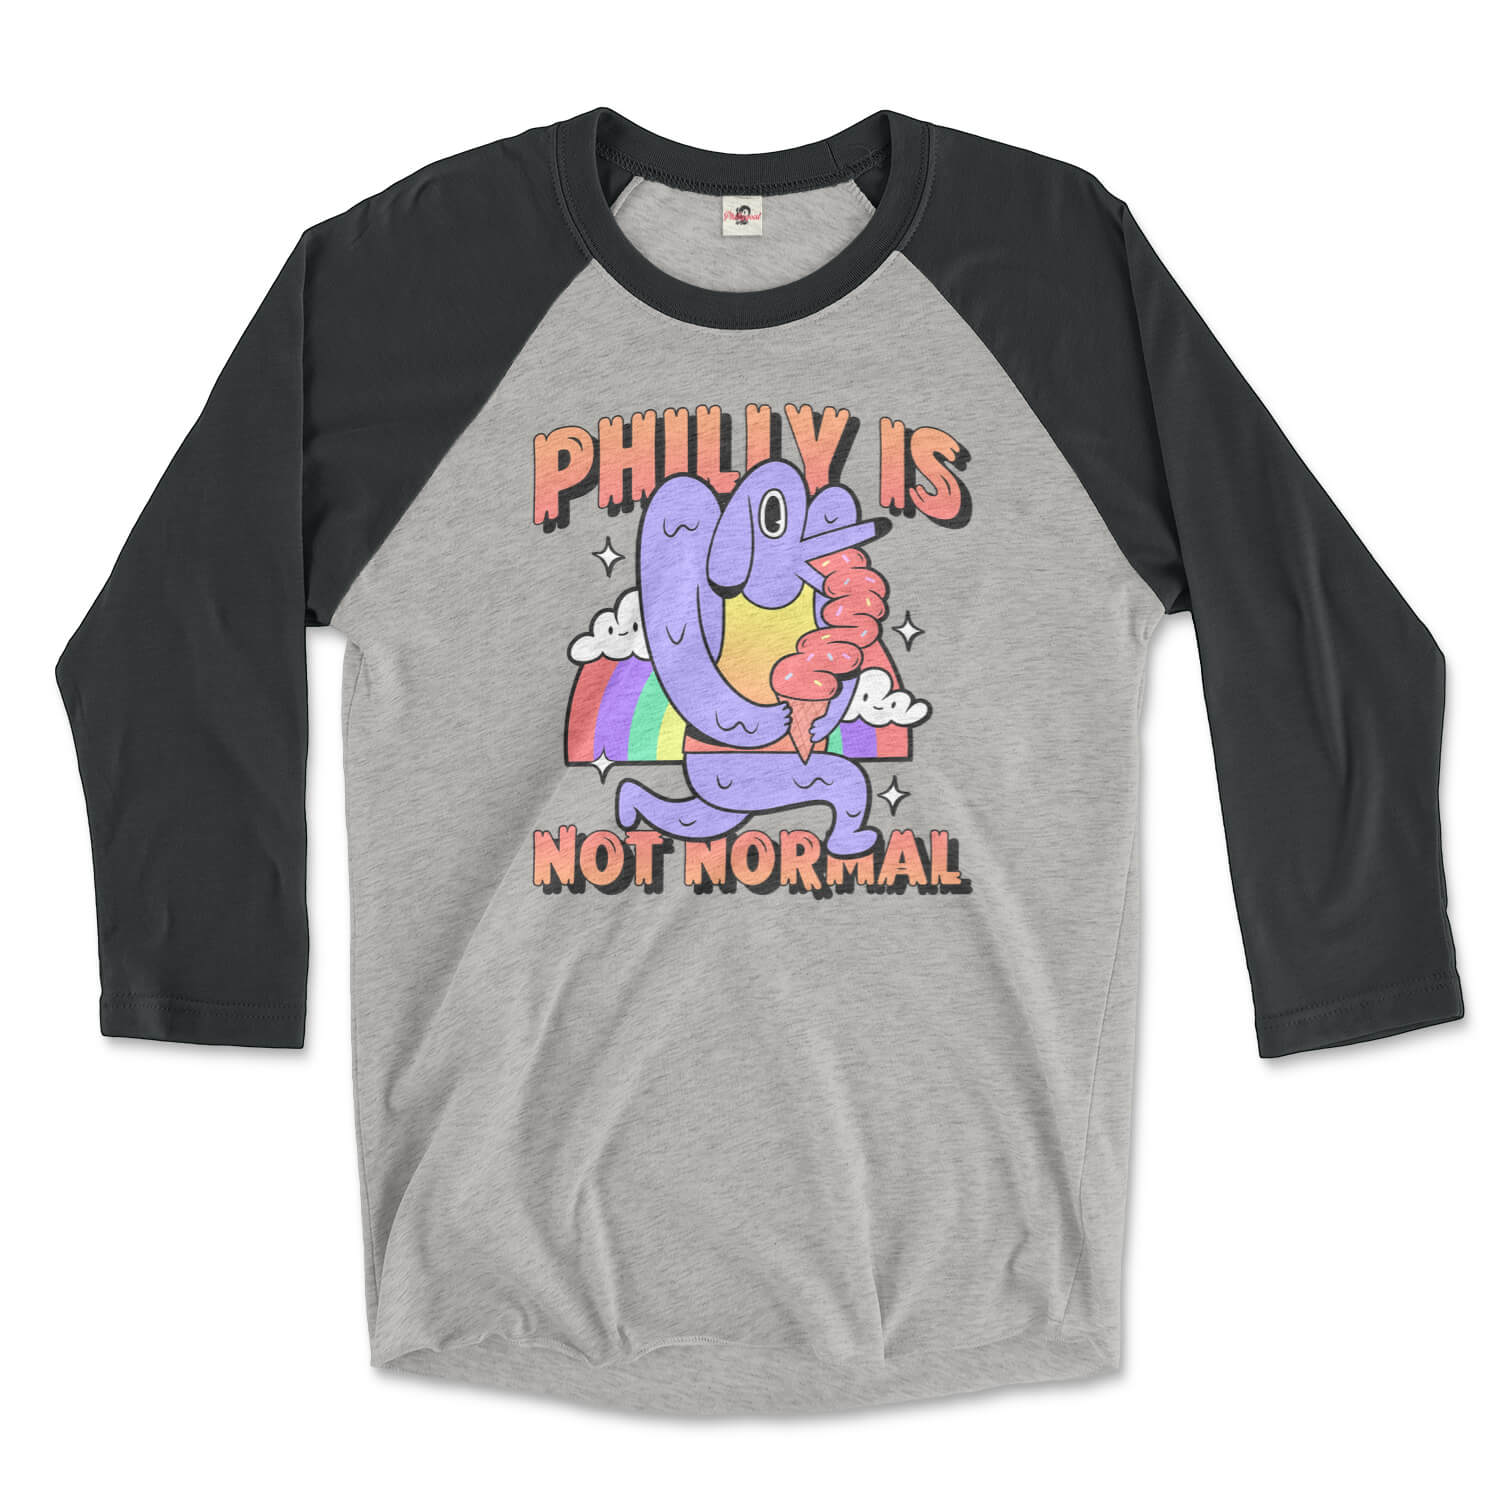 Philadelphia philly is not normal weird dog ice cream rainbow design on a vintage black and premium heather grey triblend raglan tee from Phillygoat